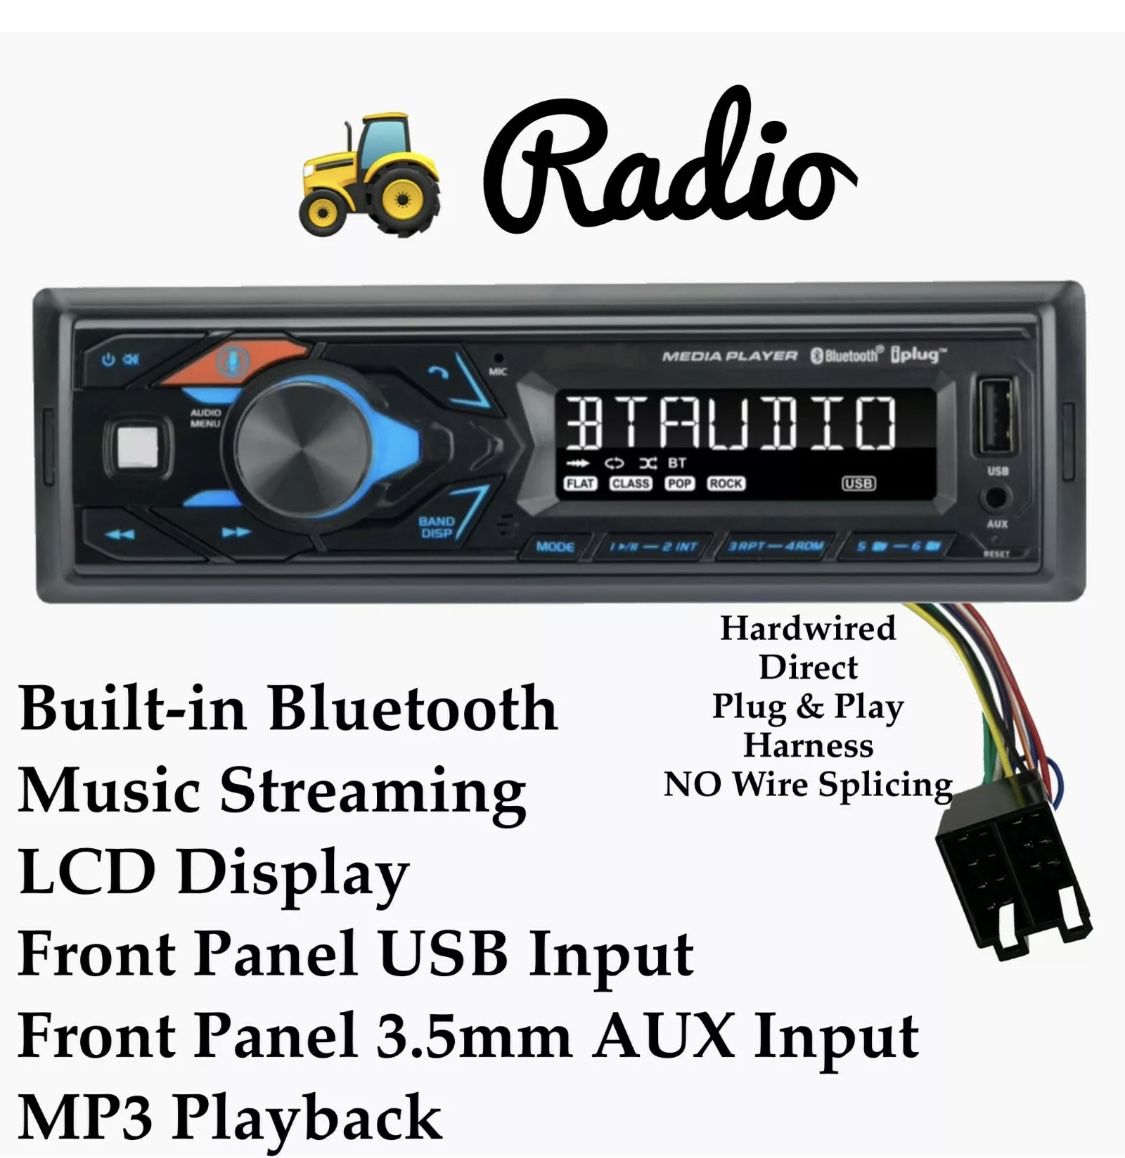 Plug and play tractor radio. Features FM radio, Bluetooth, plus more